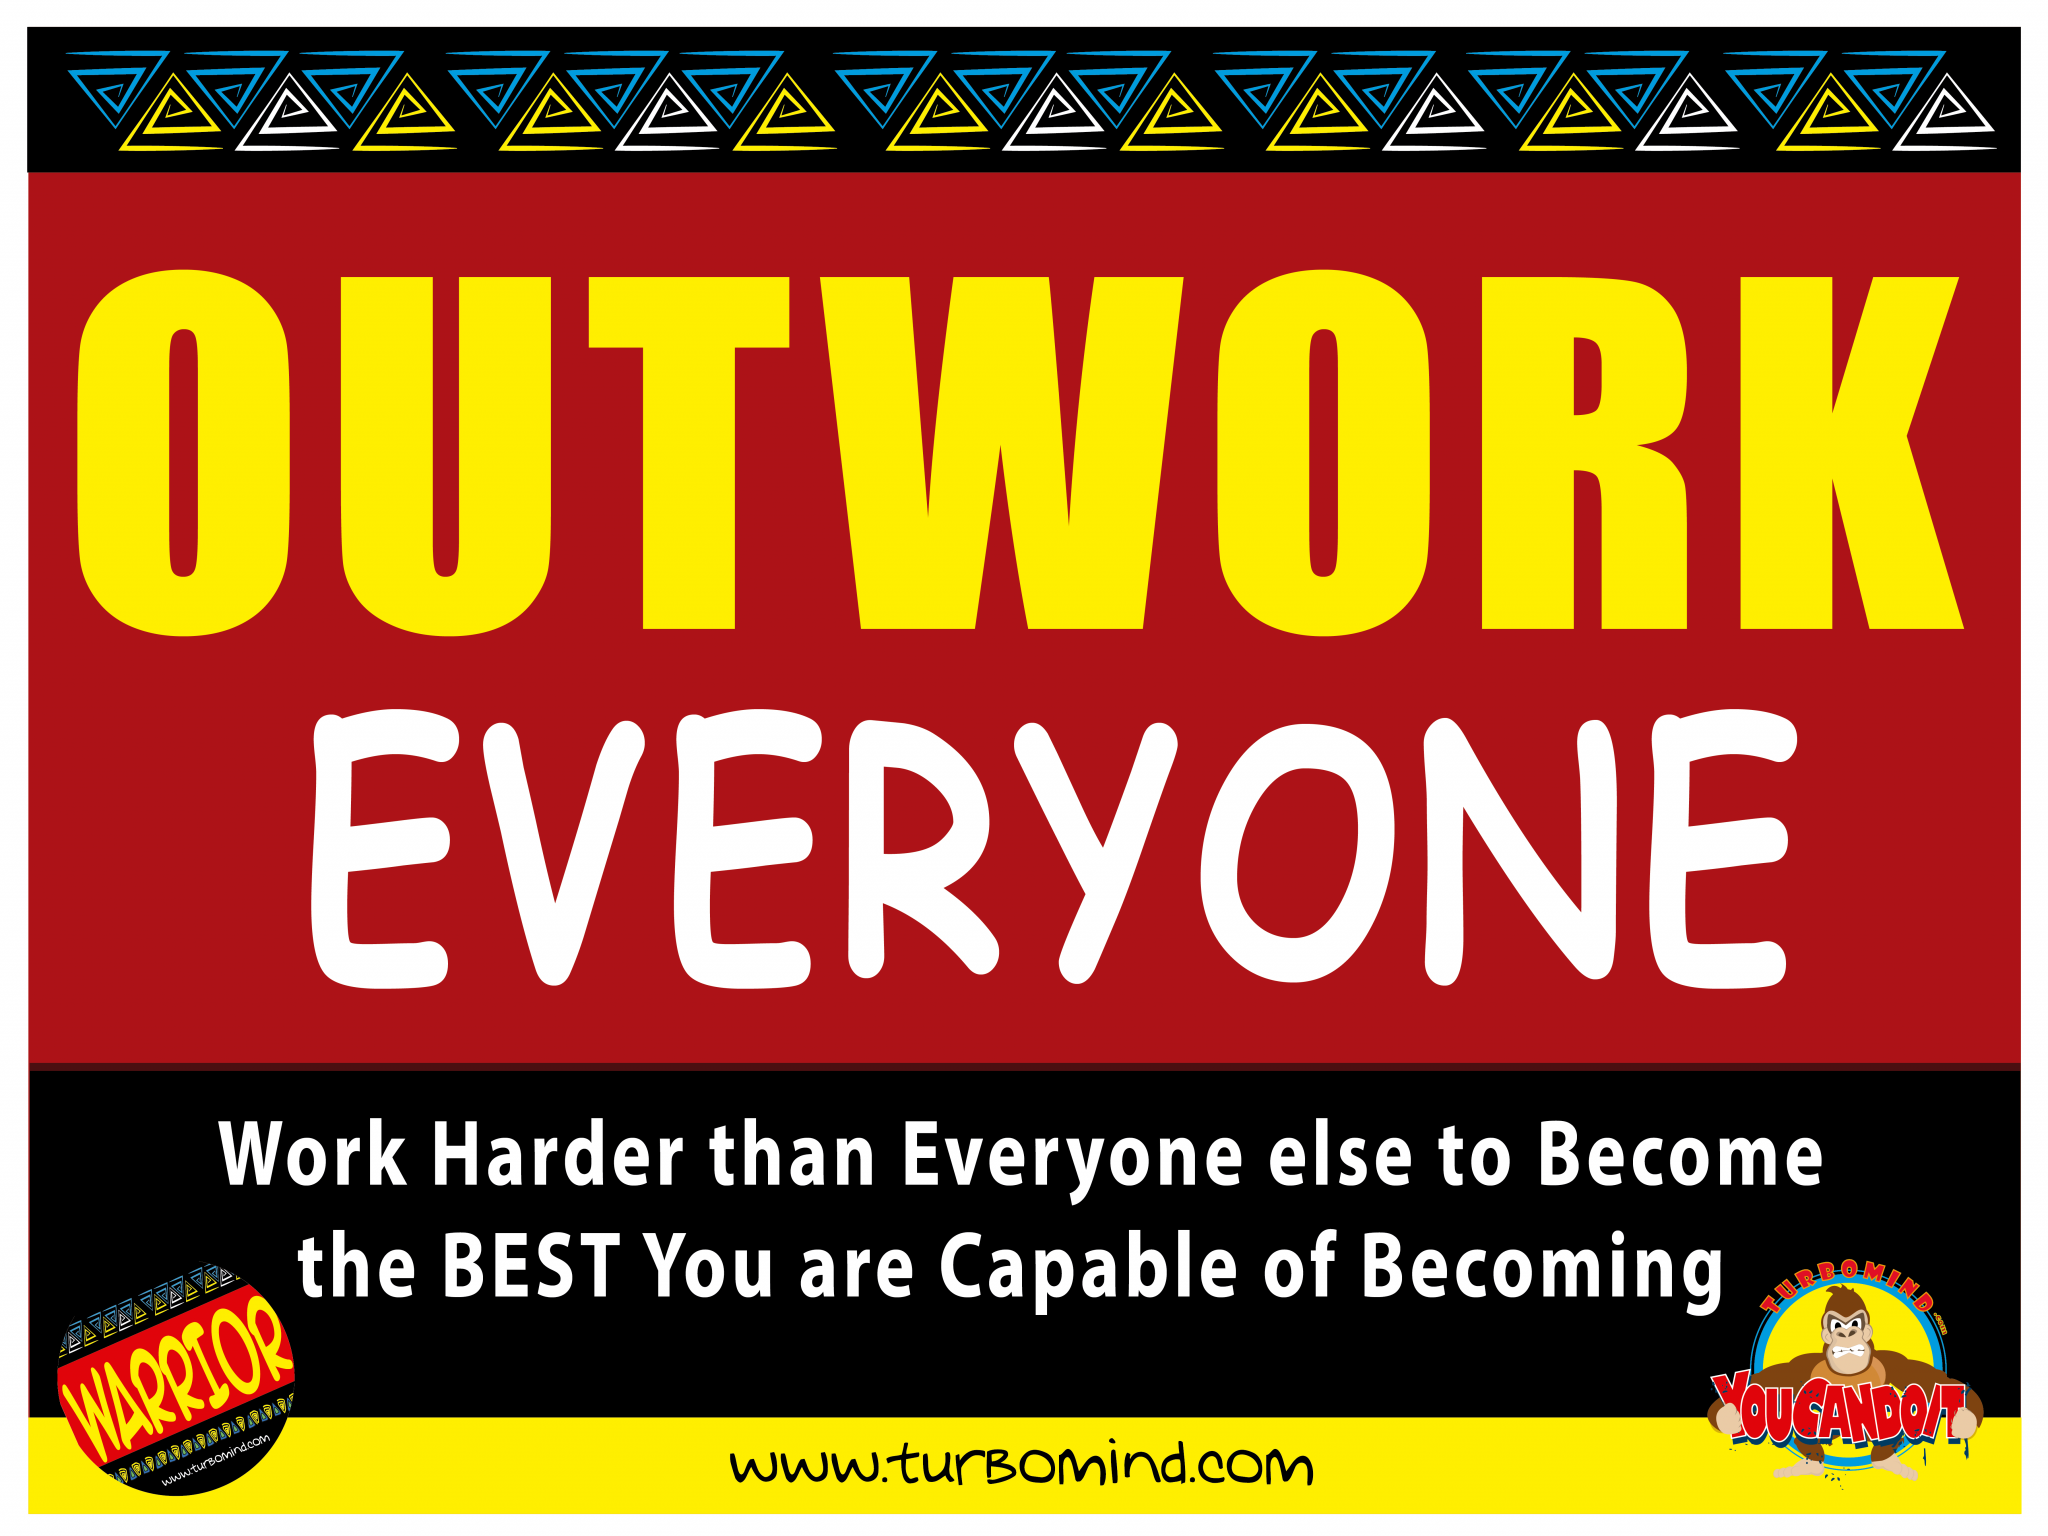 Outwork everyone, https://www.turbomind.com/